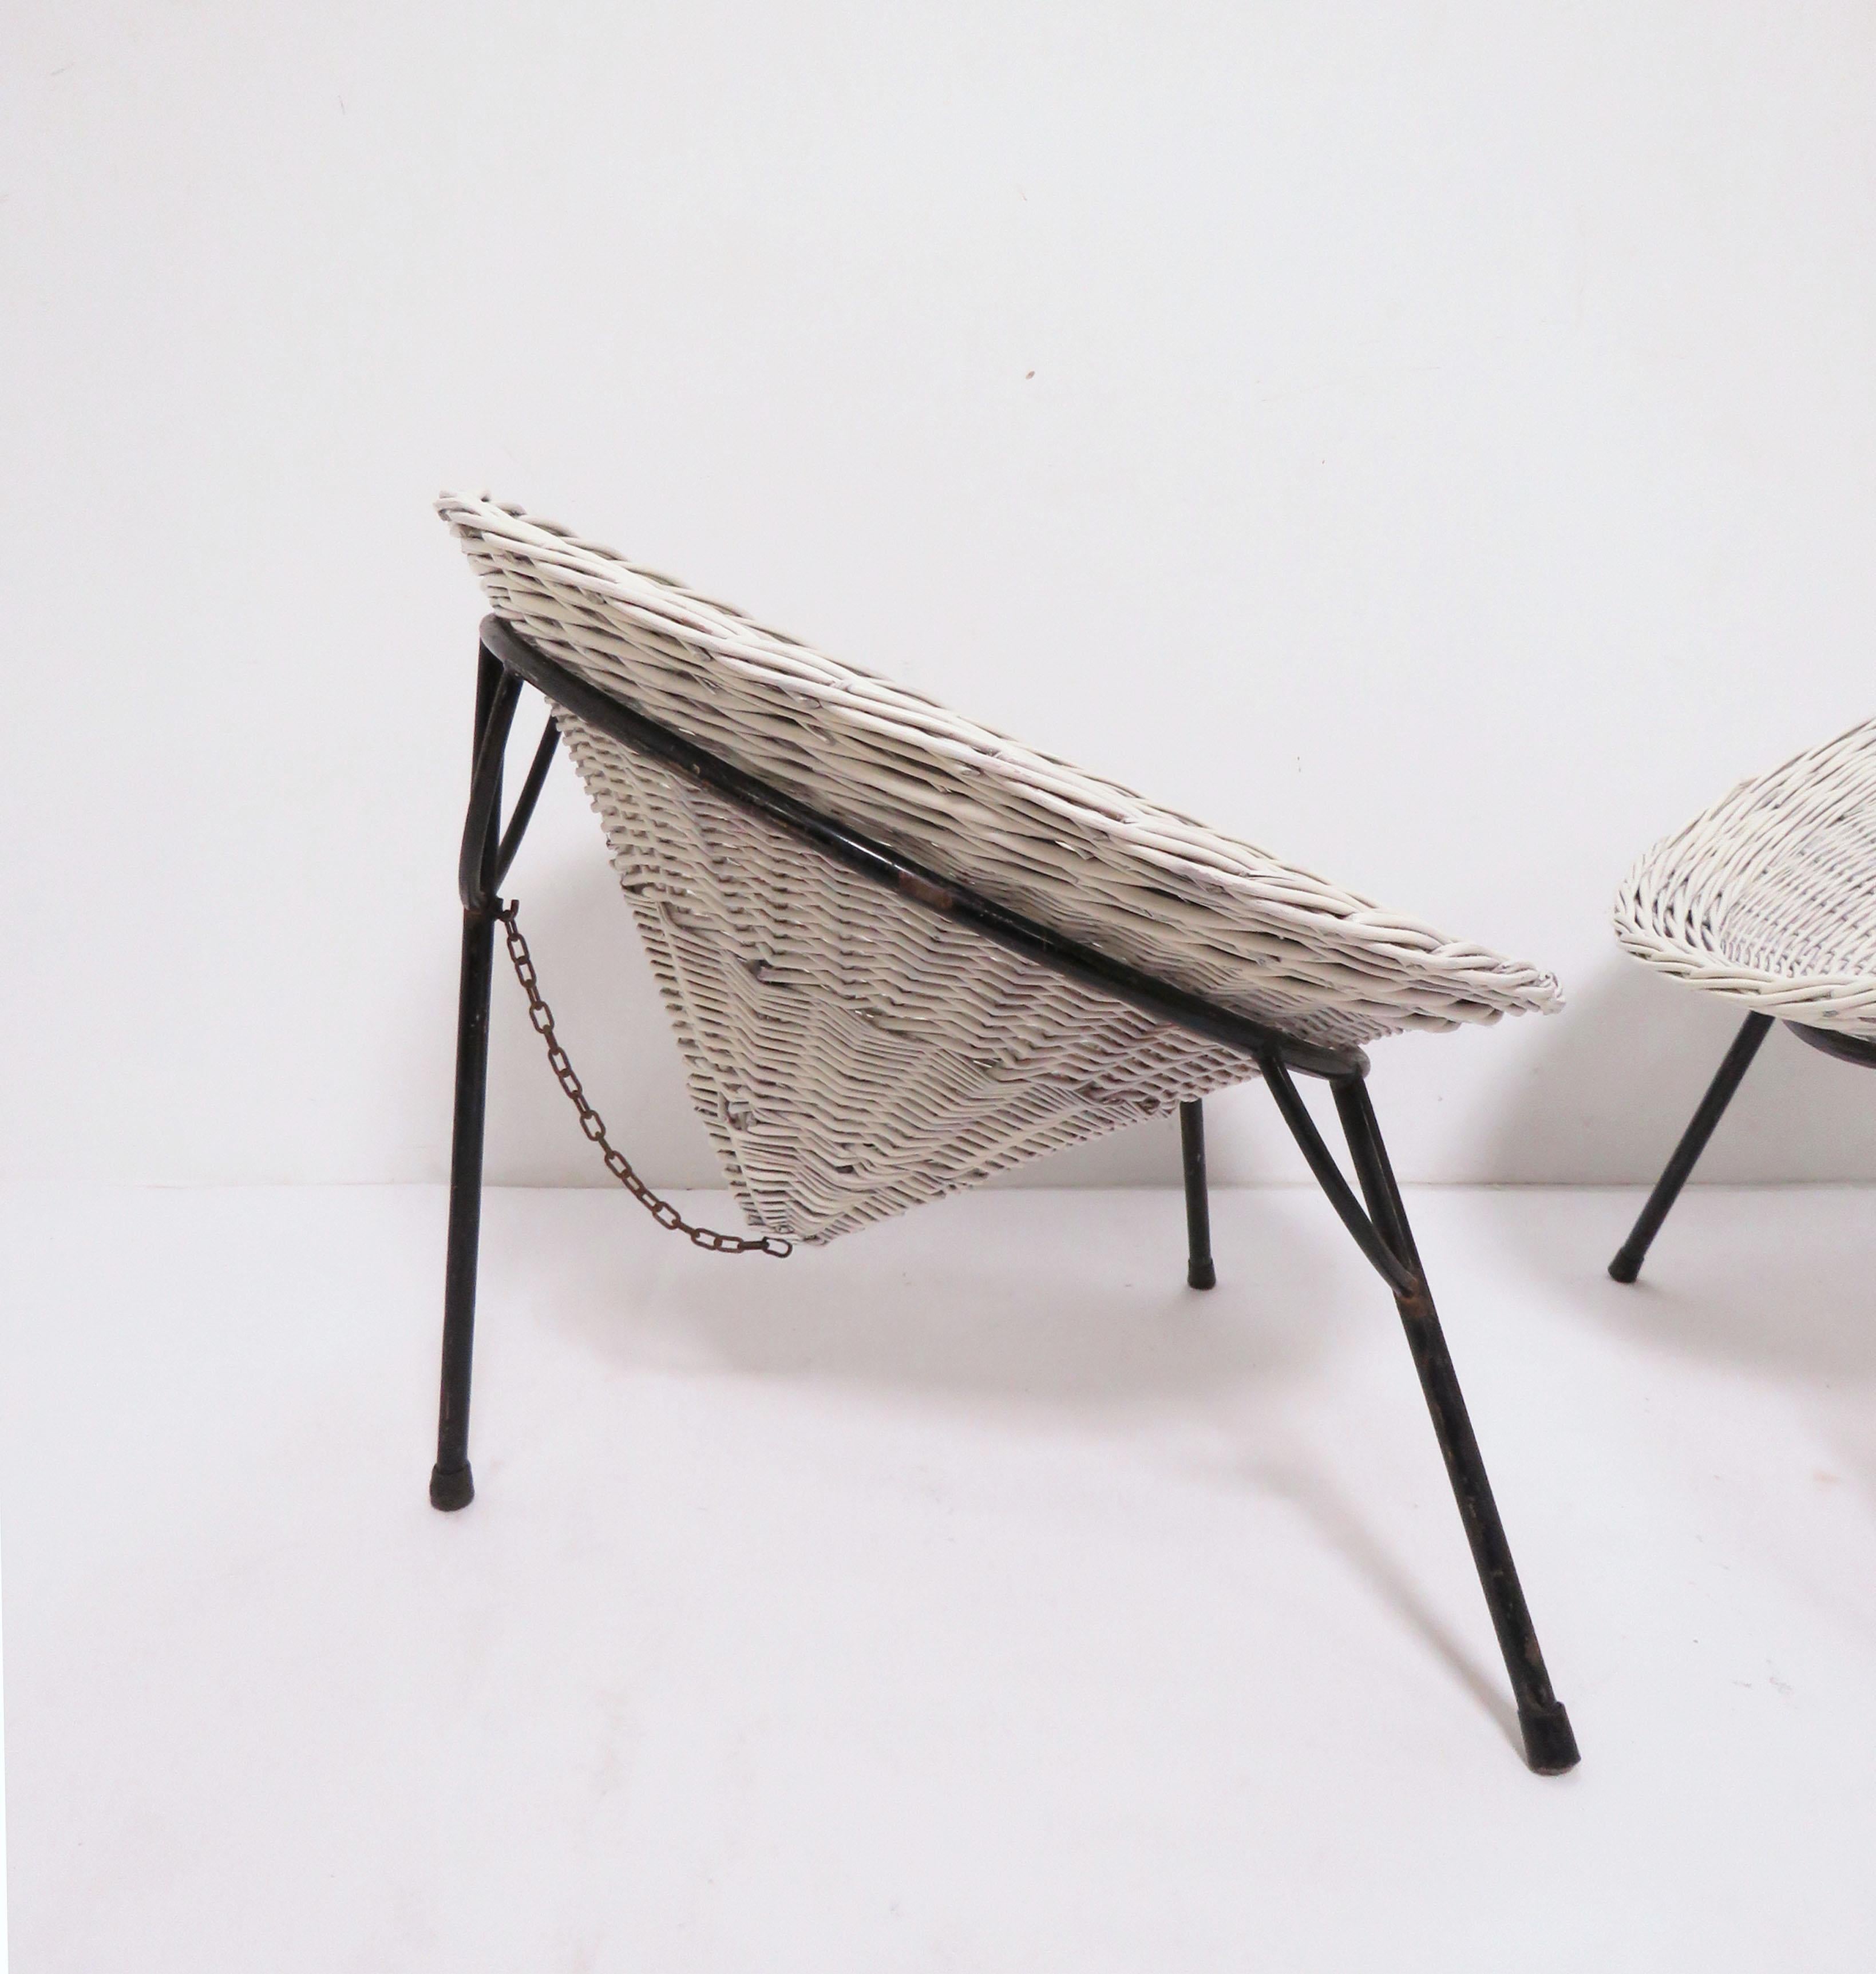 A pair of conical wicker “Sunflower” chairs by architect Roberto Mango for Tecno and imported to the US by Allan Gould Designs. Founded in 1953, Tecno was one of the most important companies to advance the global postwar fascination with Italian